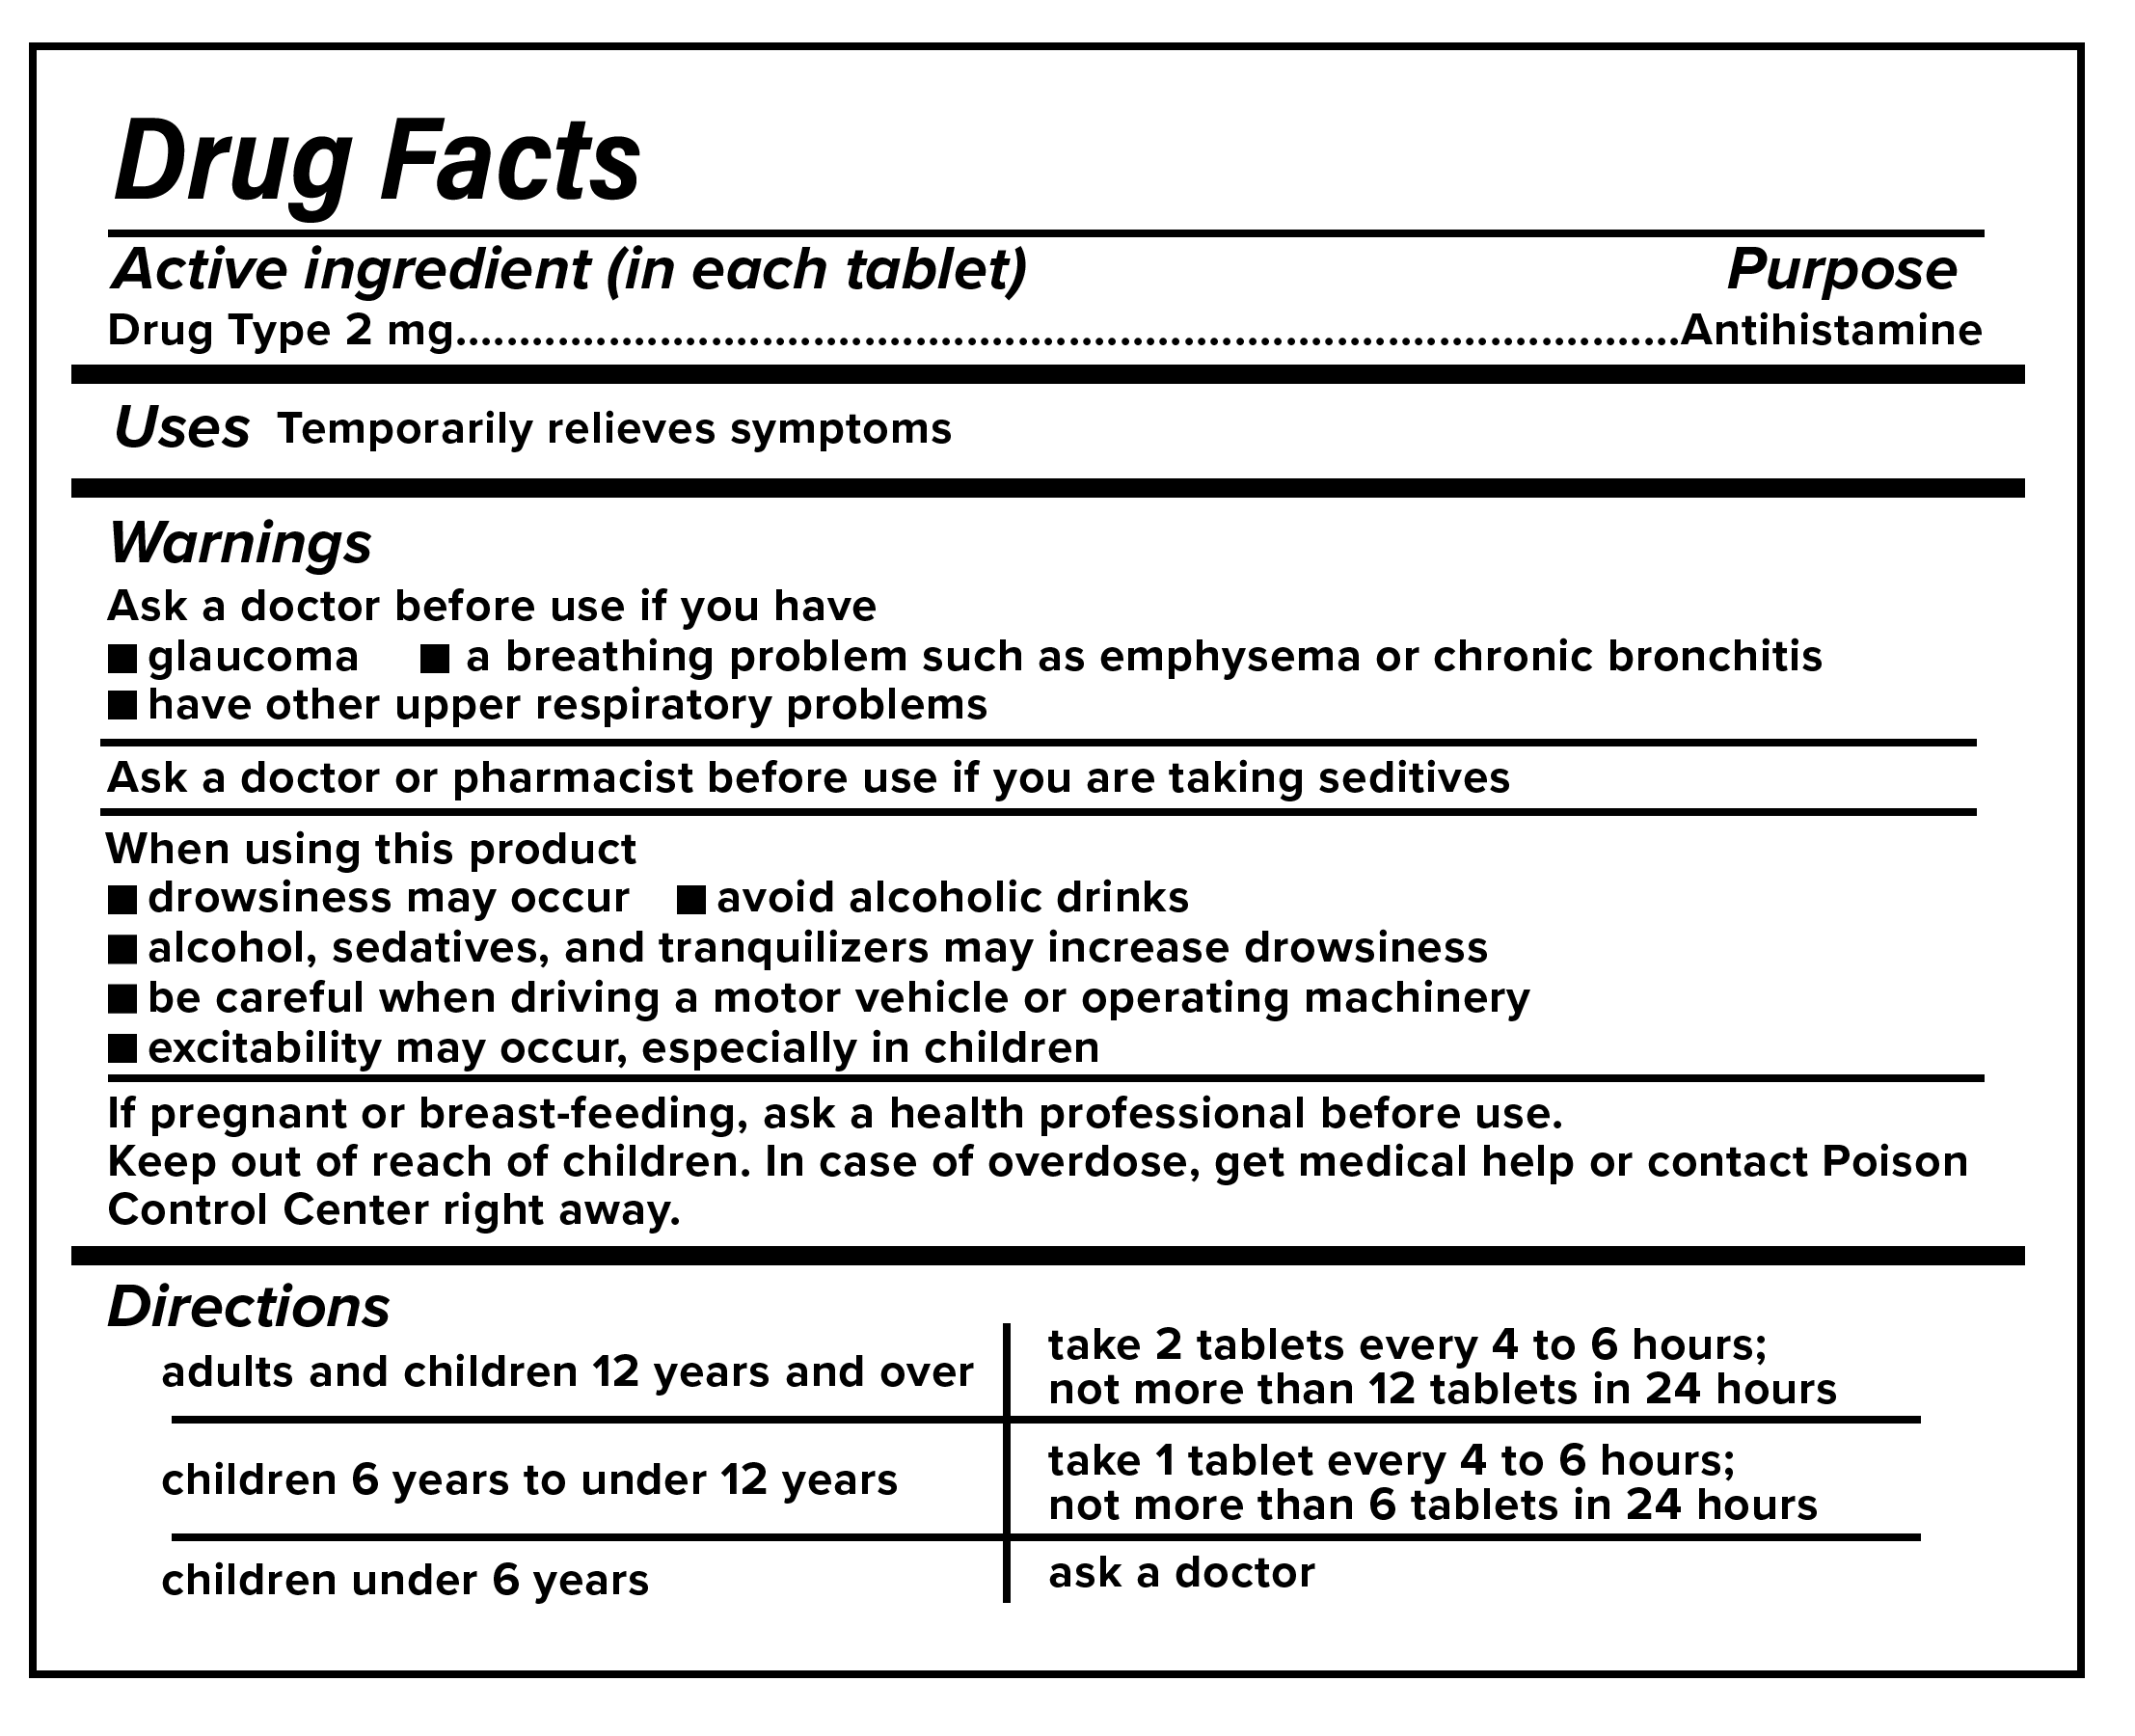 Over-The-Counter Drug Facts example